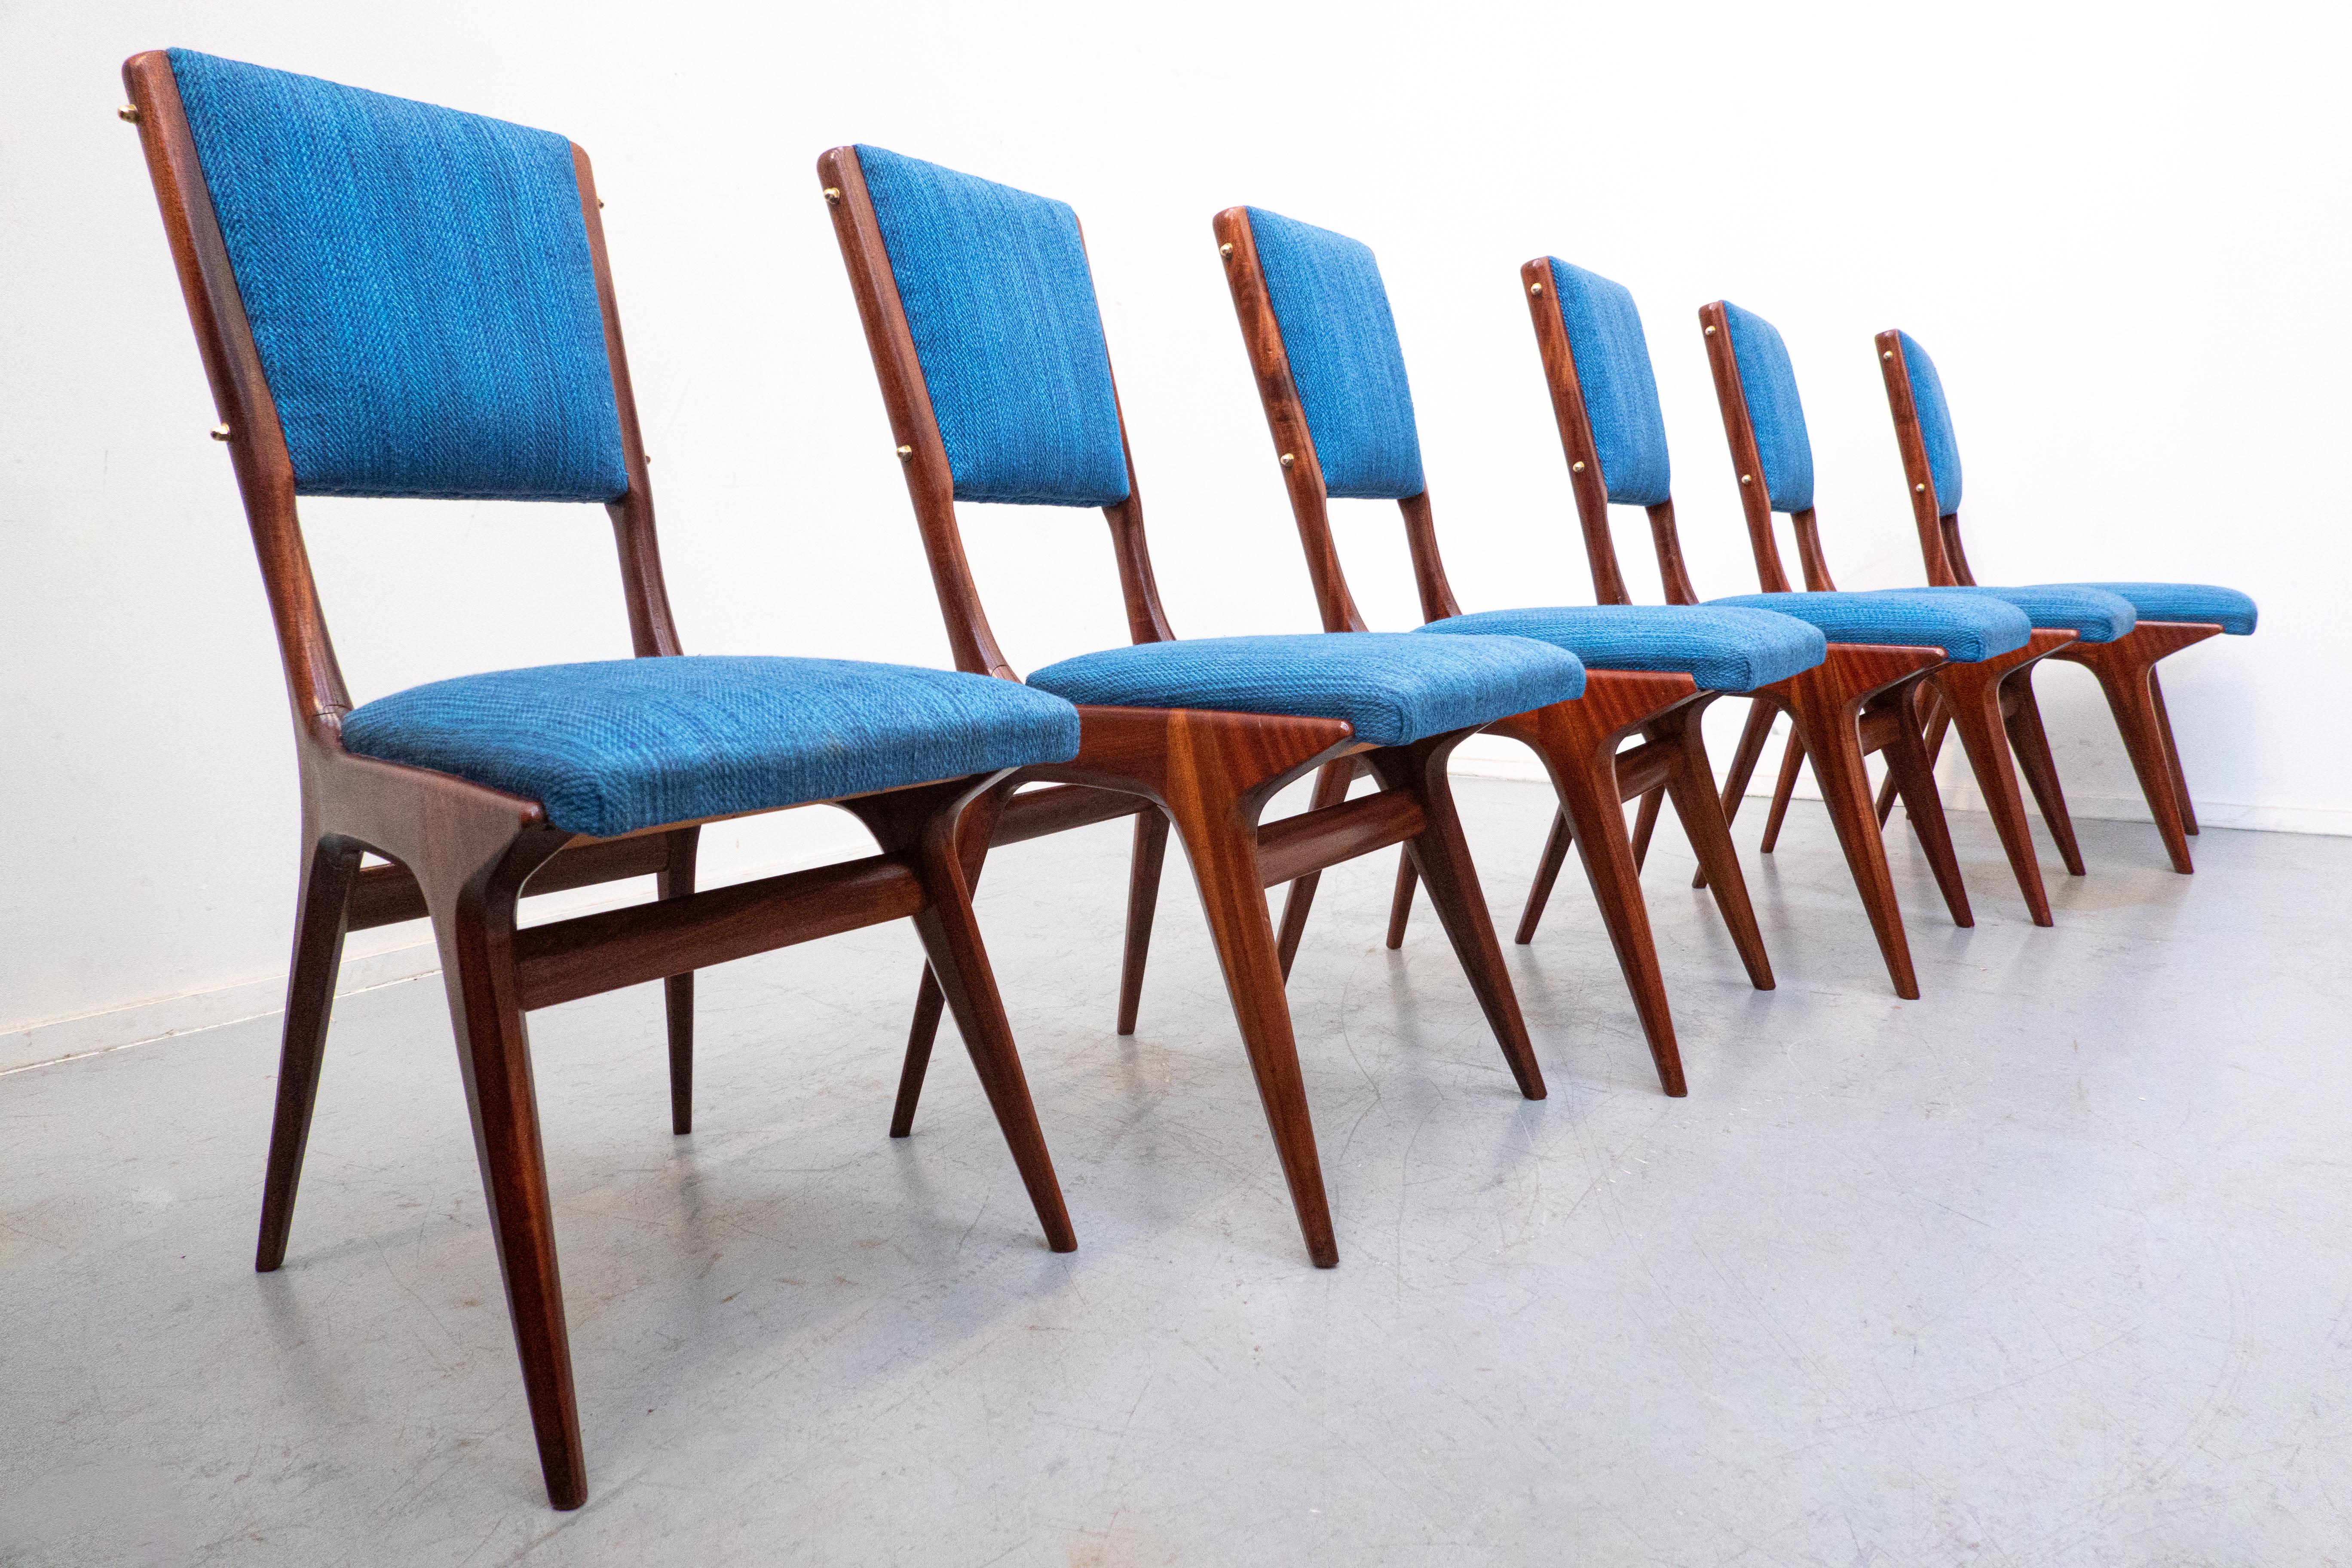 European Set of 6 Blue Chairs Model 634 by Carlo de Carli for Cassina, Italy, 1950s For Sale